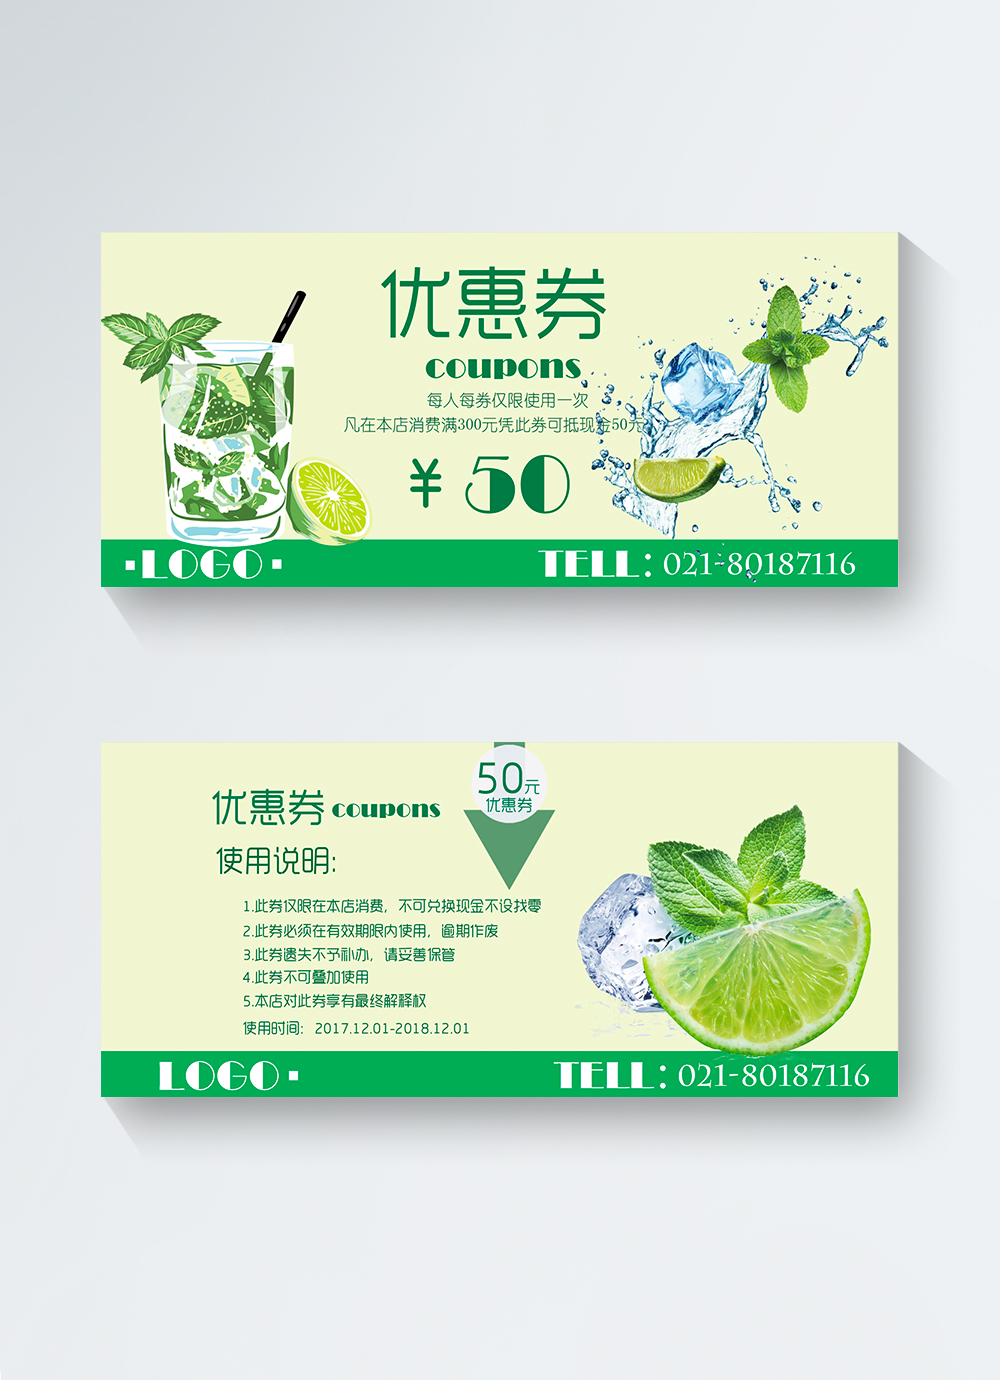 Green fresh lemon drinks coupon template image picture free download